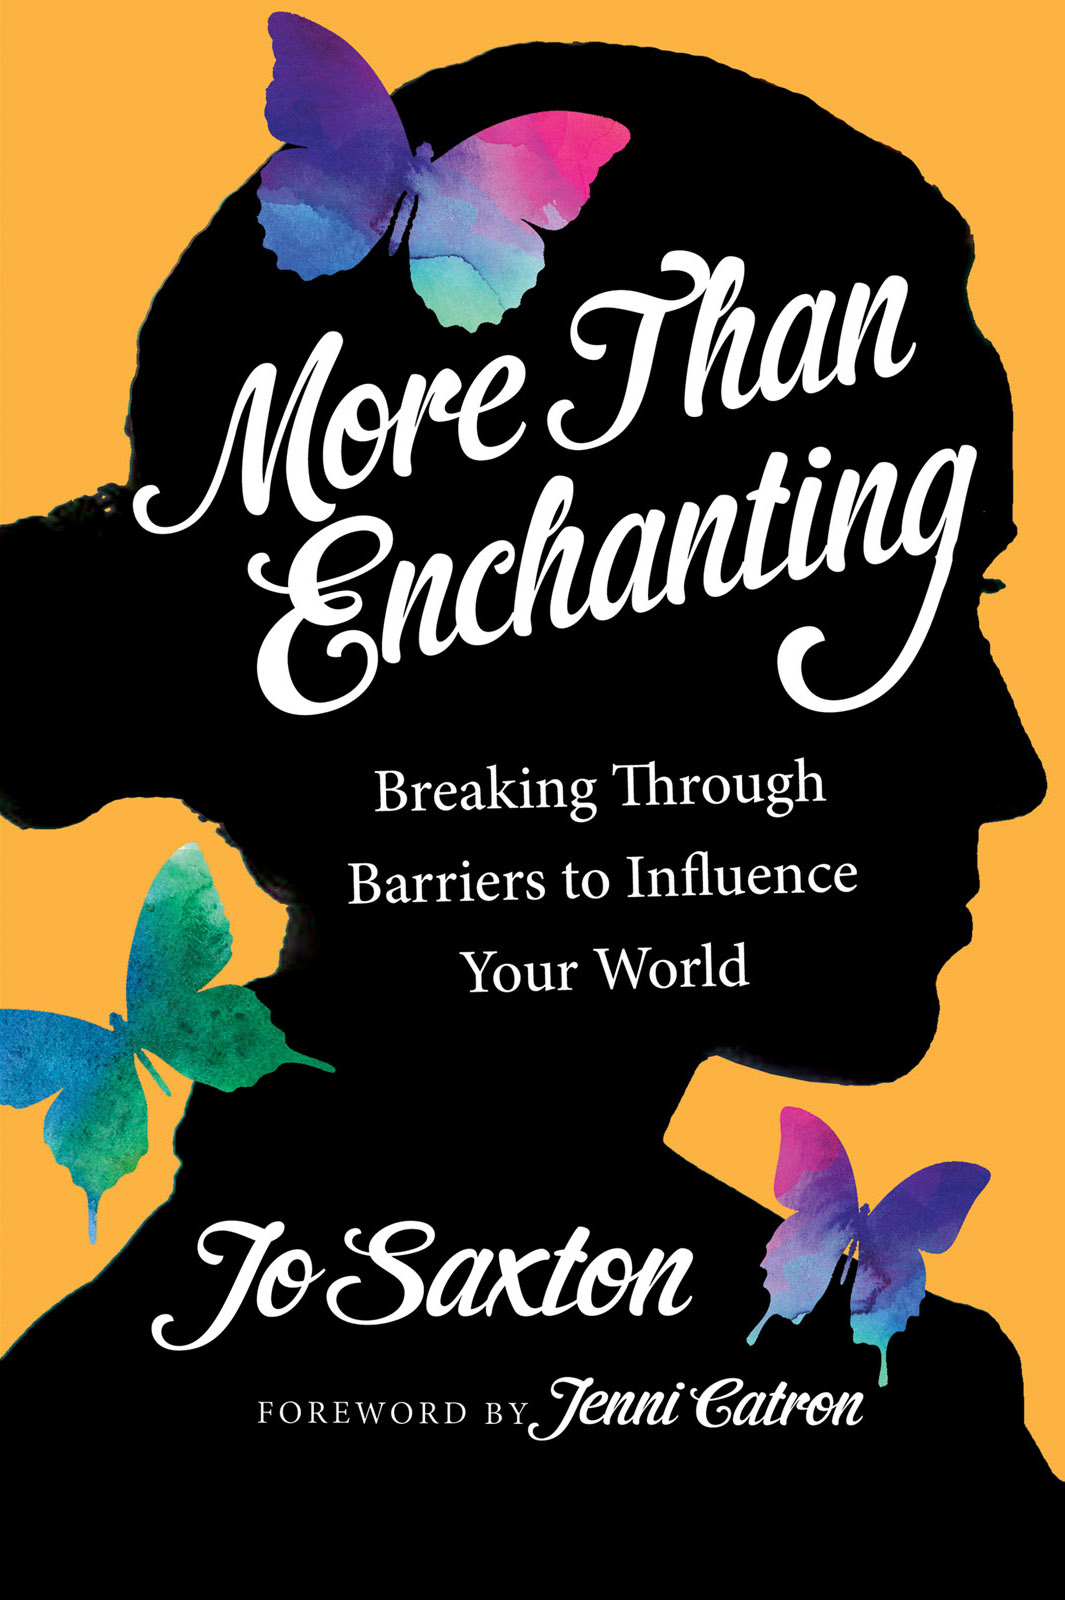 This image is the cover for the book More Than Enchanting